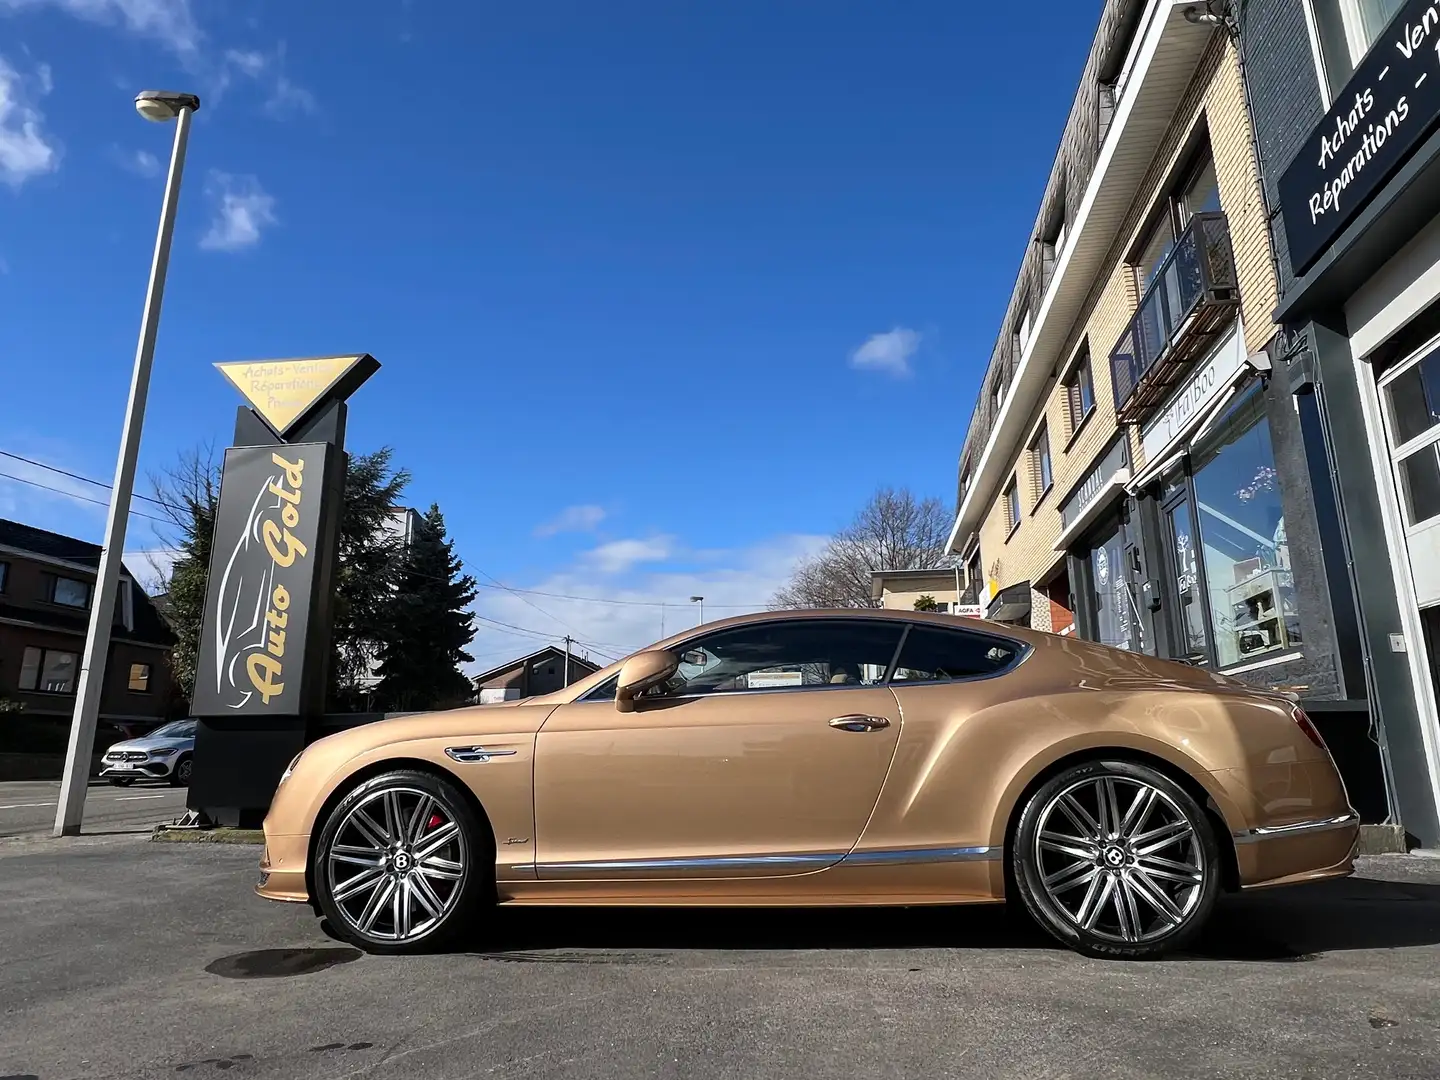 Bentley Continental GT SPEED W12 LIMITED 1 OF 21 GOLD NEUF 1PROPRIO ! Goud - 1